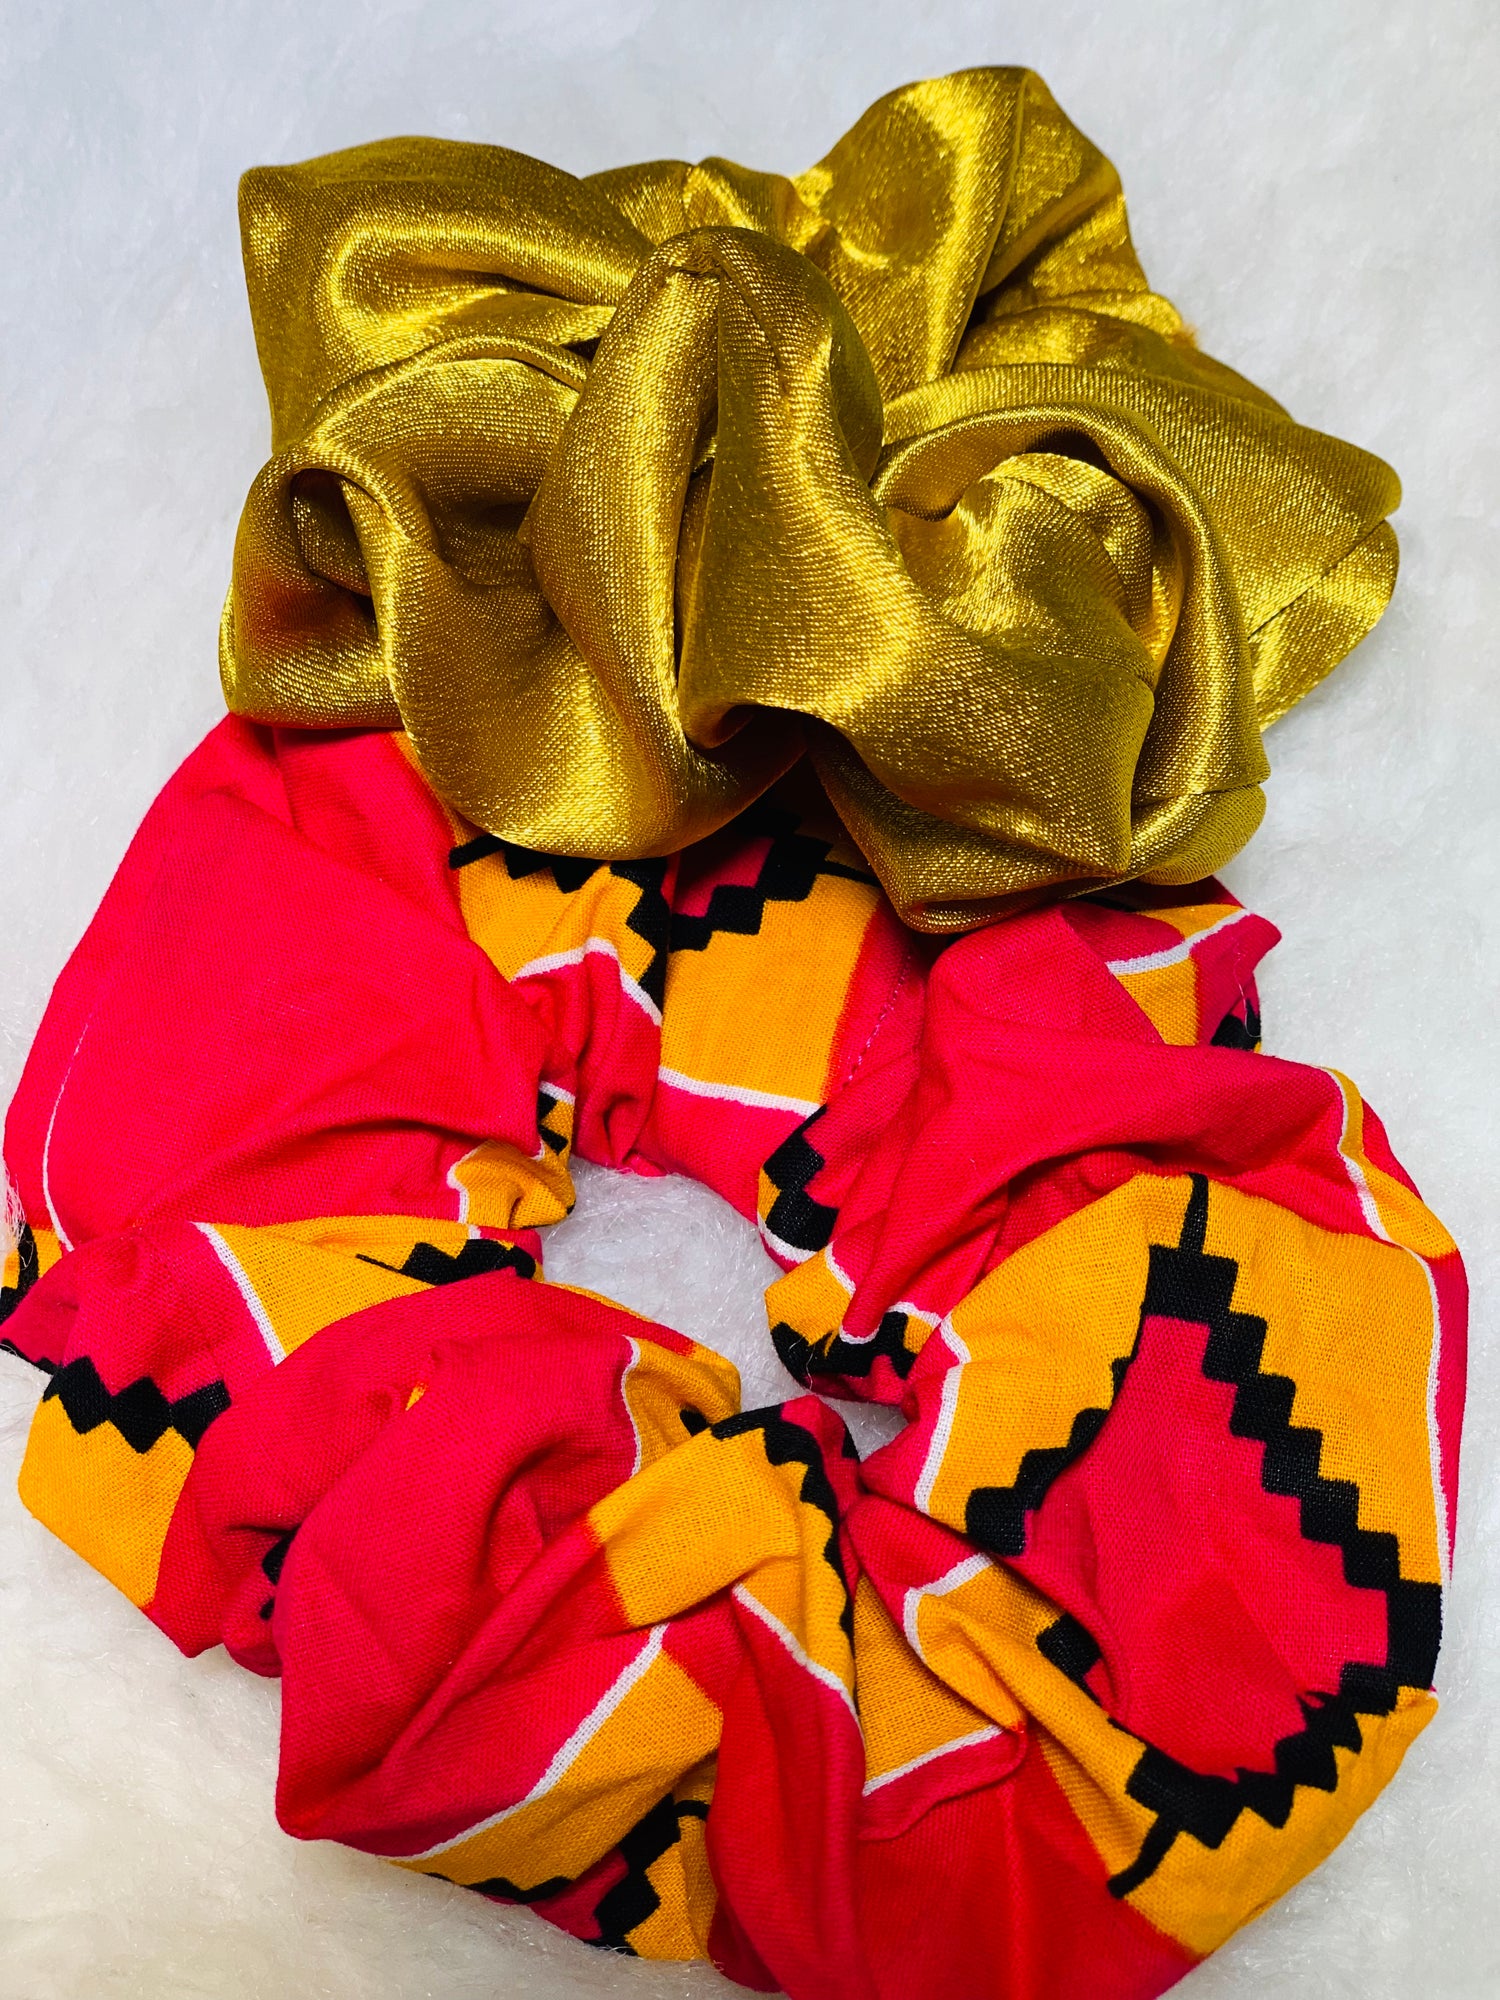 One Gold Large Scrunchie And One Red, Cream And Black Large Scrunchie 